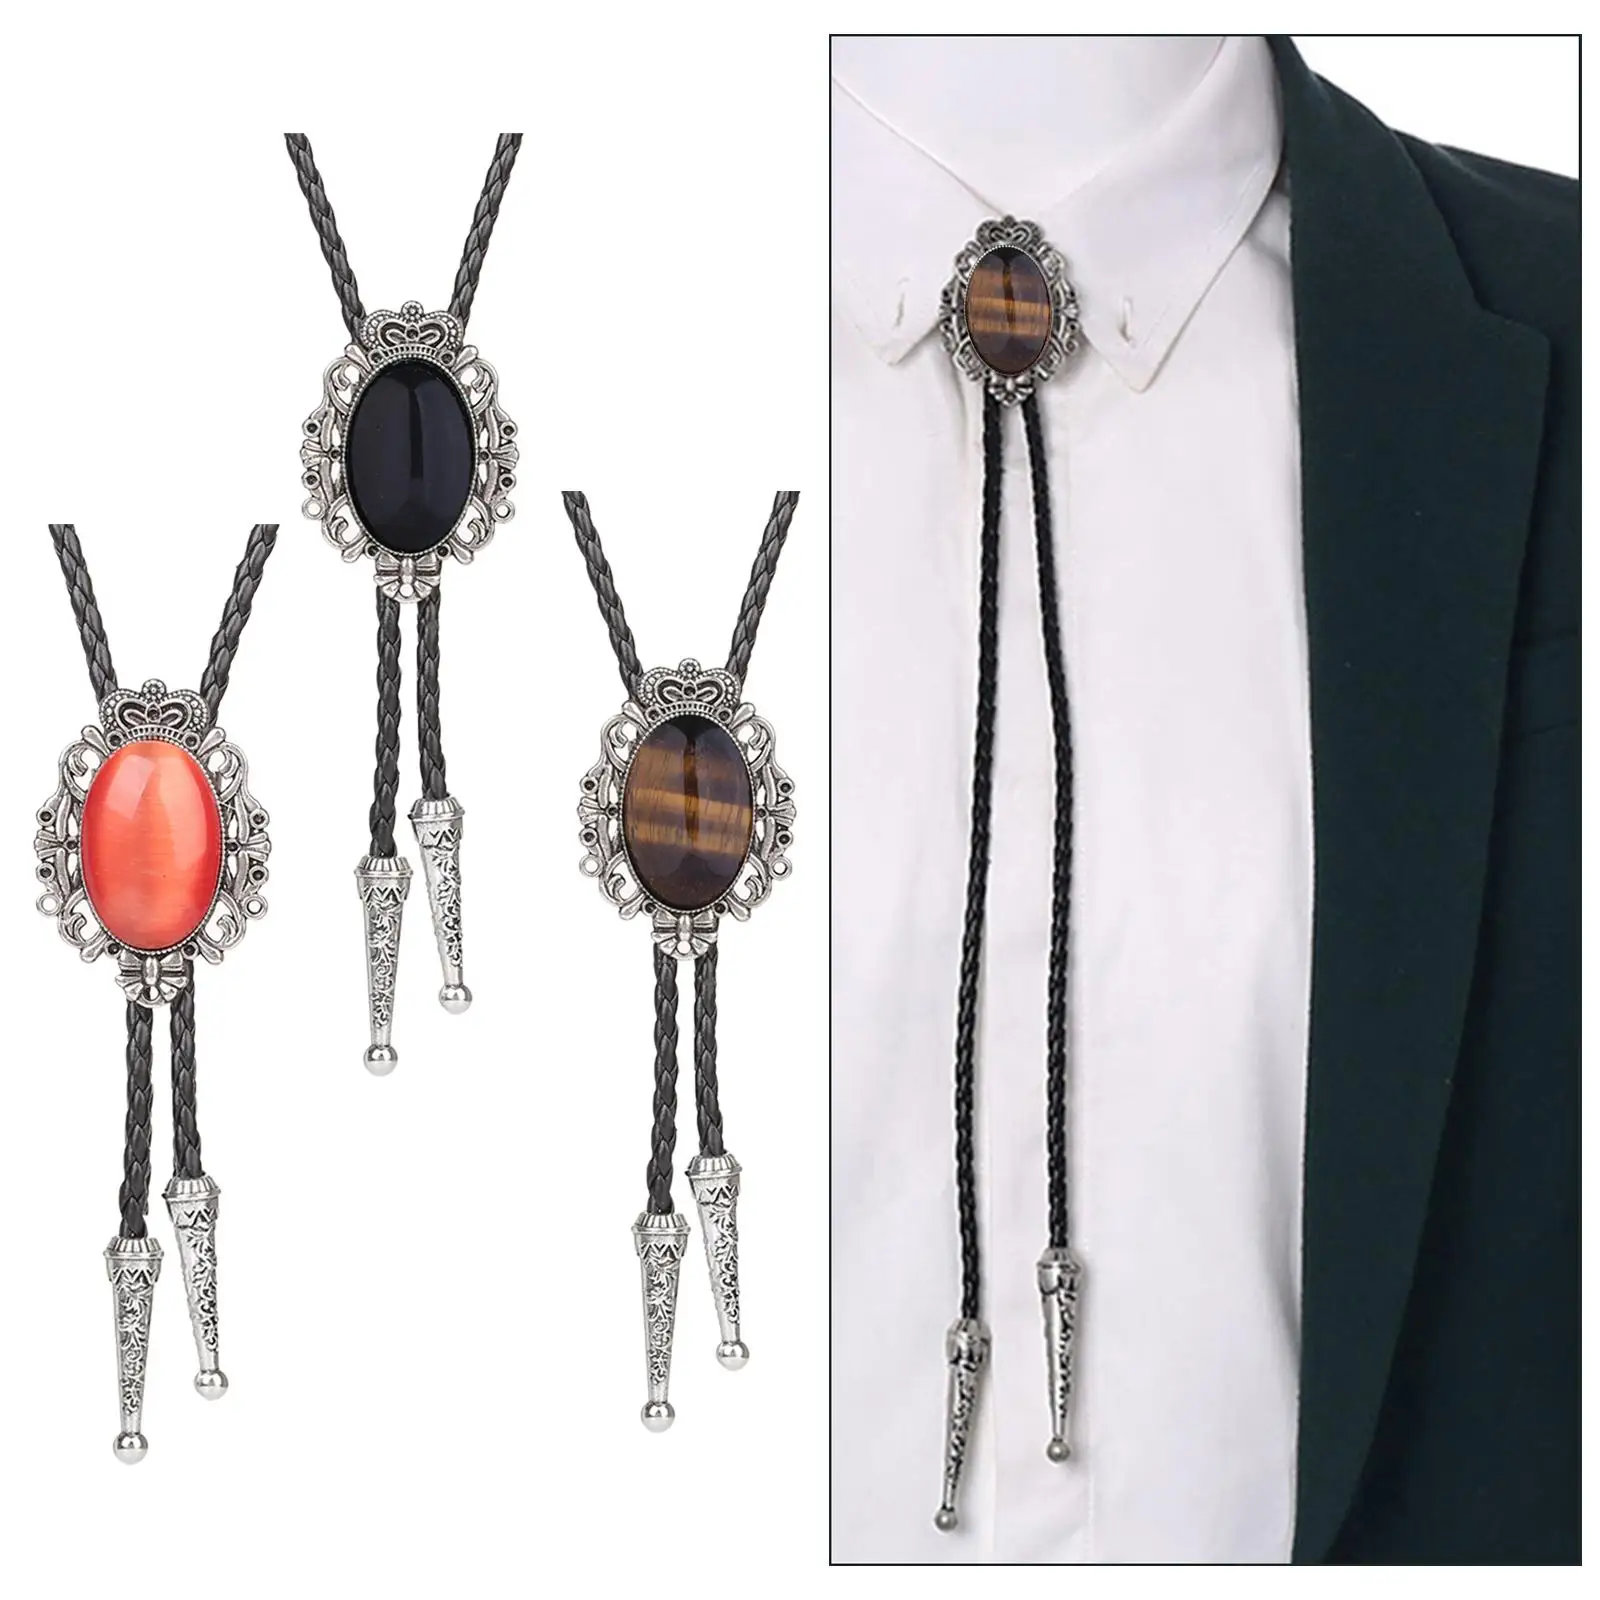  Bolo Tie, Necktie Oval Costume Gift Western  Alloy Adjustable Vintage Rodeo Necklace for Party Christmas Men and Women